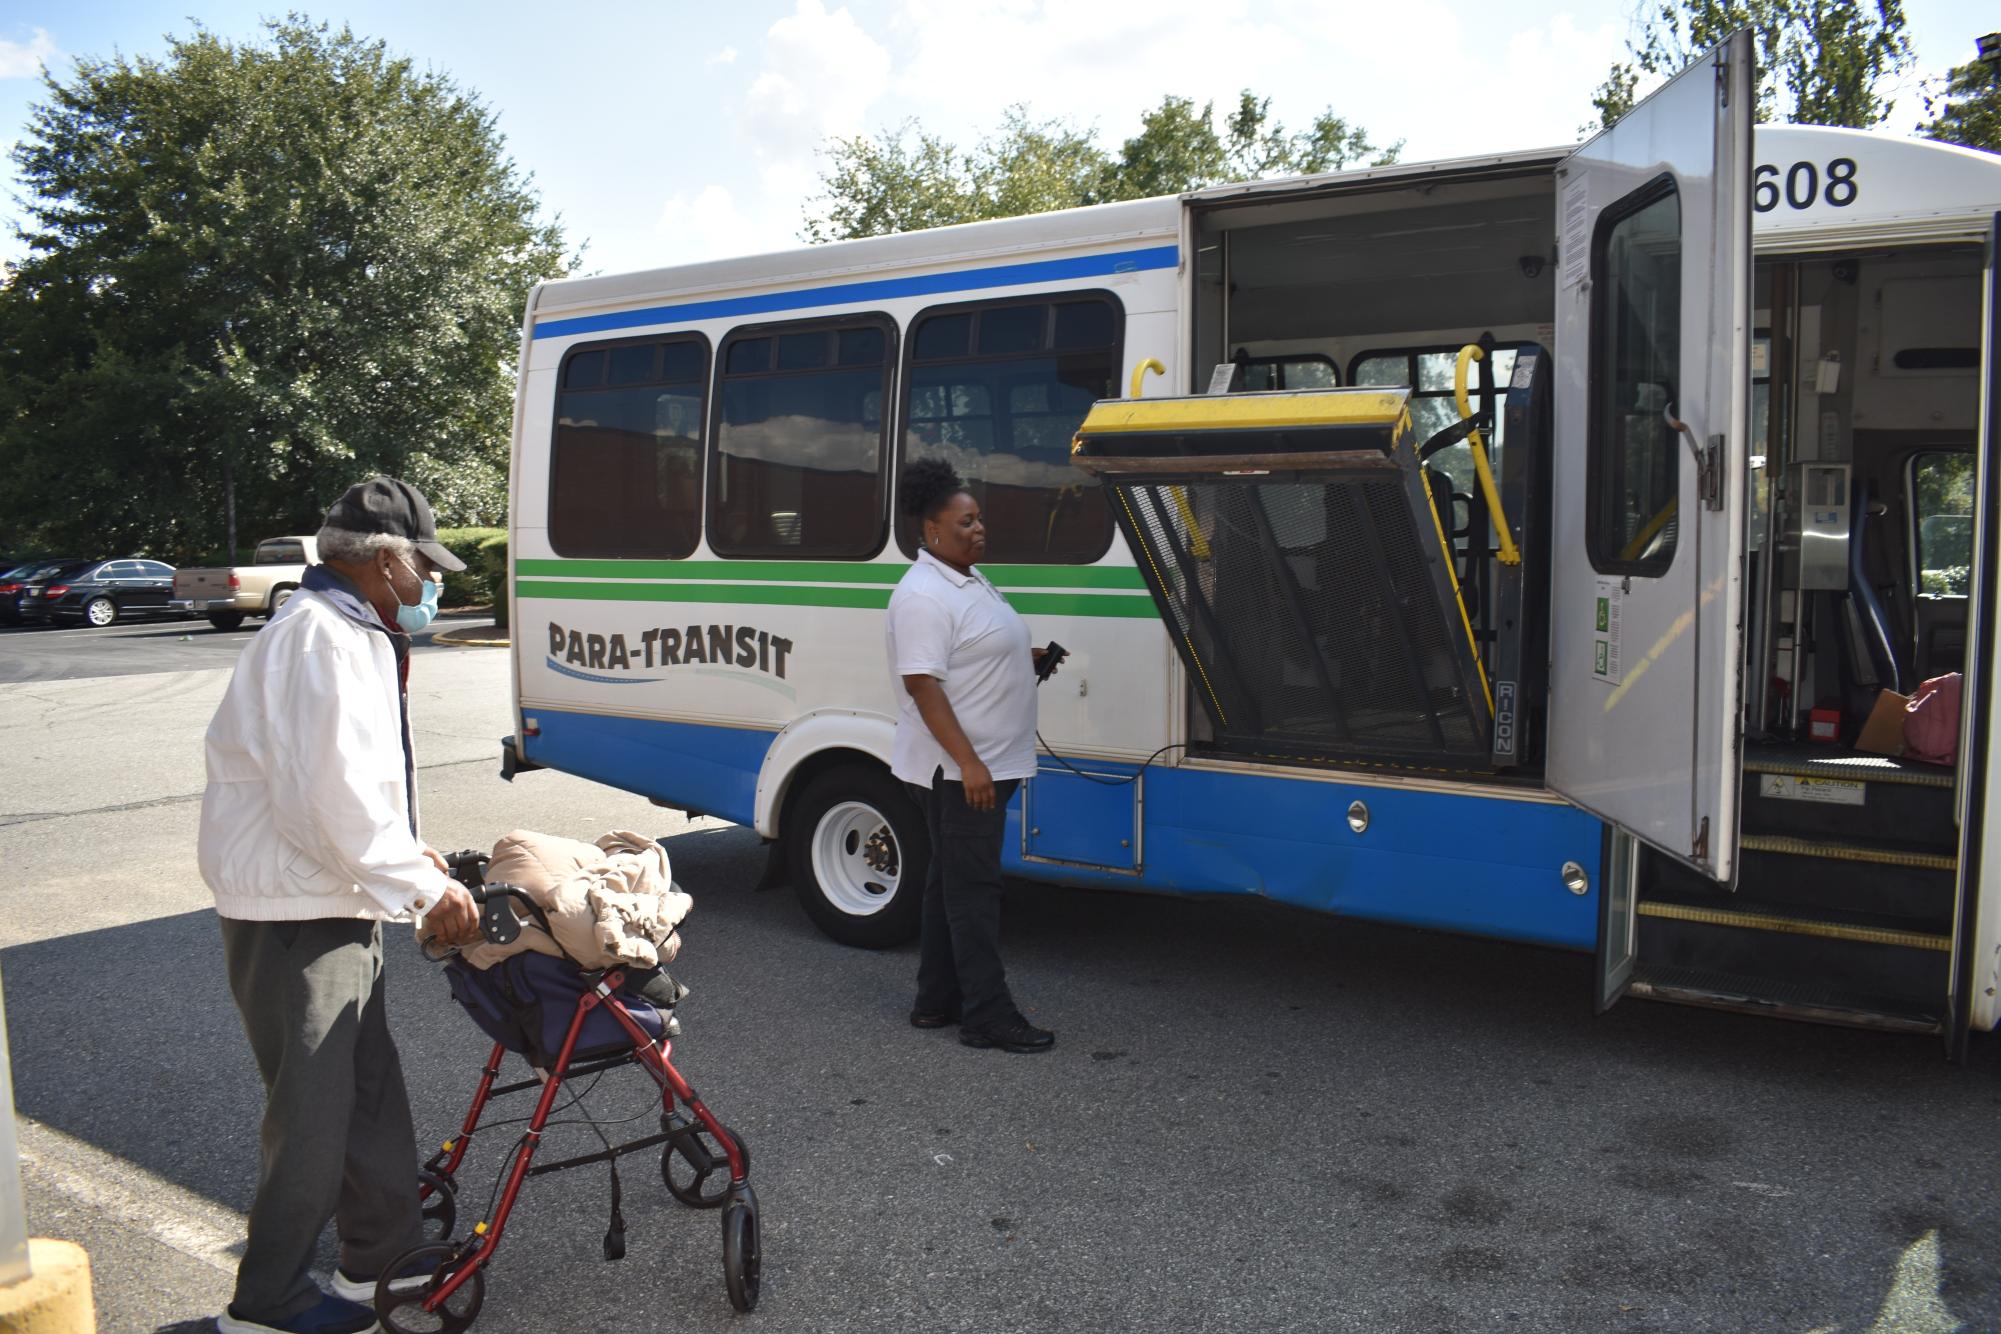 Robert Lee Cohen, 87, takes the MTA paratransit bus to a dialysis center in east Macon three times weekly. Cohen moved to Macon from Buffalo, New York, in 2021. Here you got to have a car to get around, Cohen said. The new technology will call Cohen before the MTA bus arrives so he doesnt have to wait in the elements. It would make things easier, Cohen said of the bus tracking system.